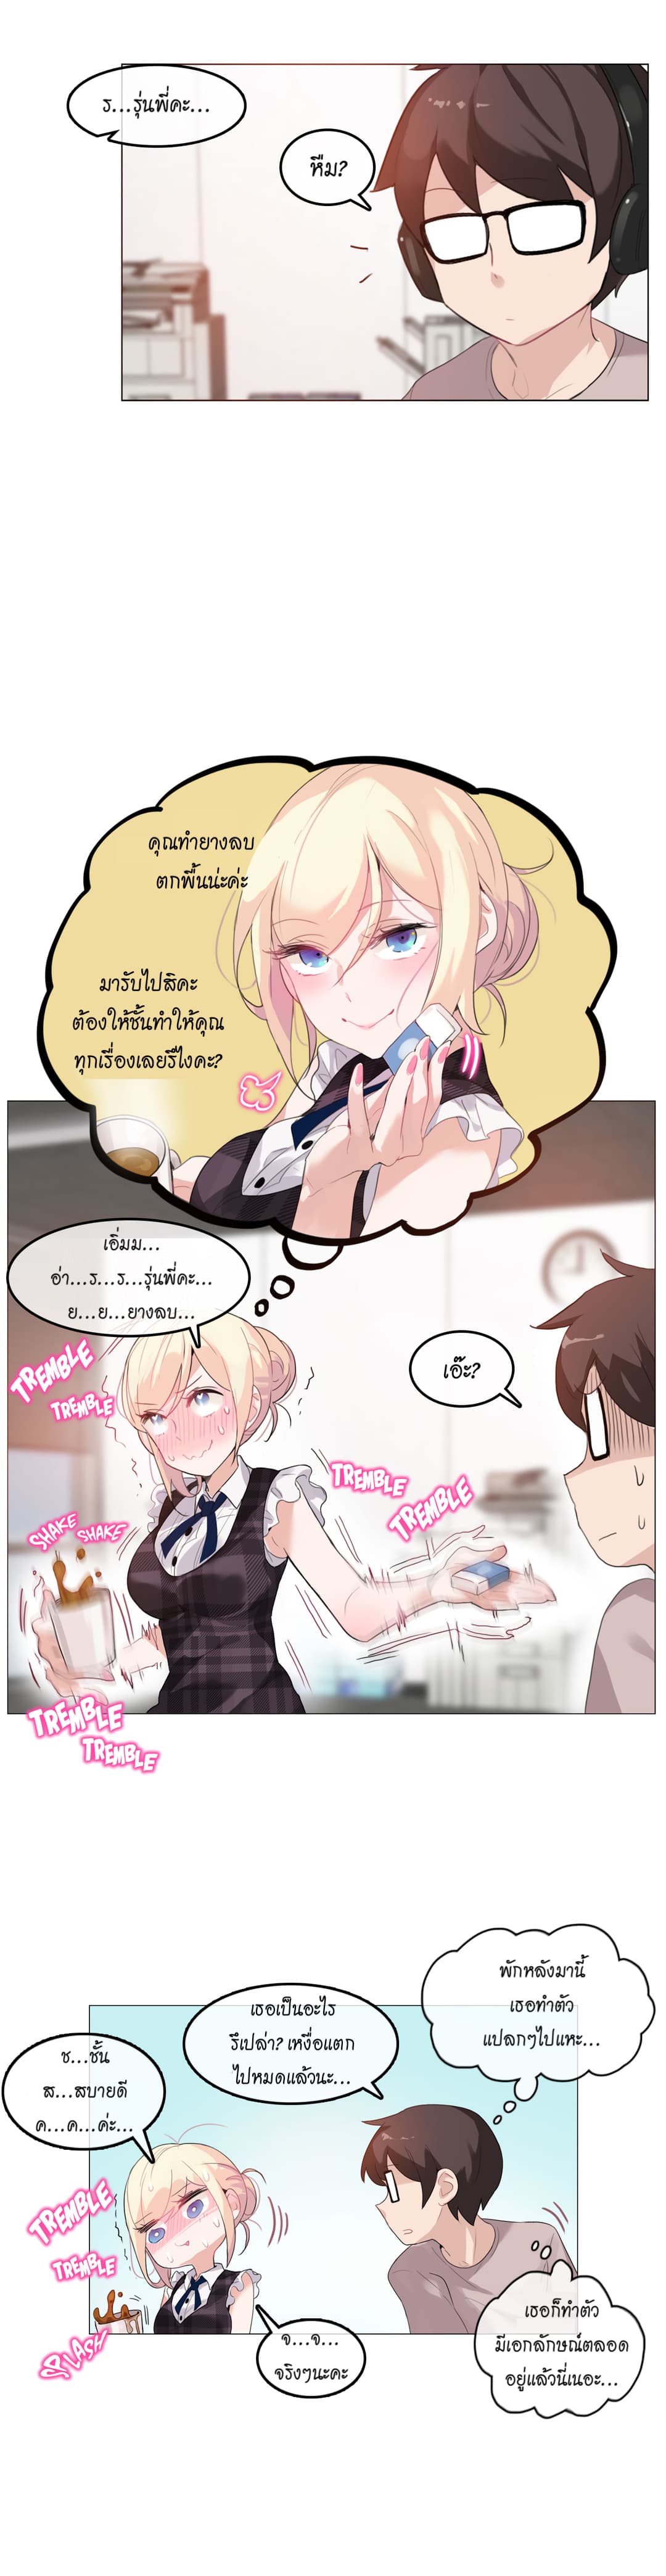 A Pervert’s Daily Life 18 (3)